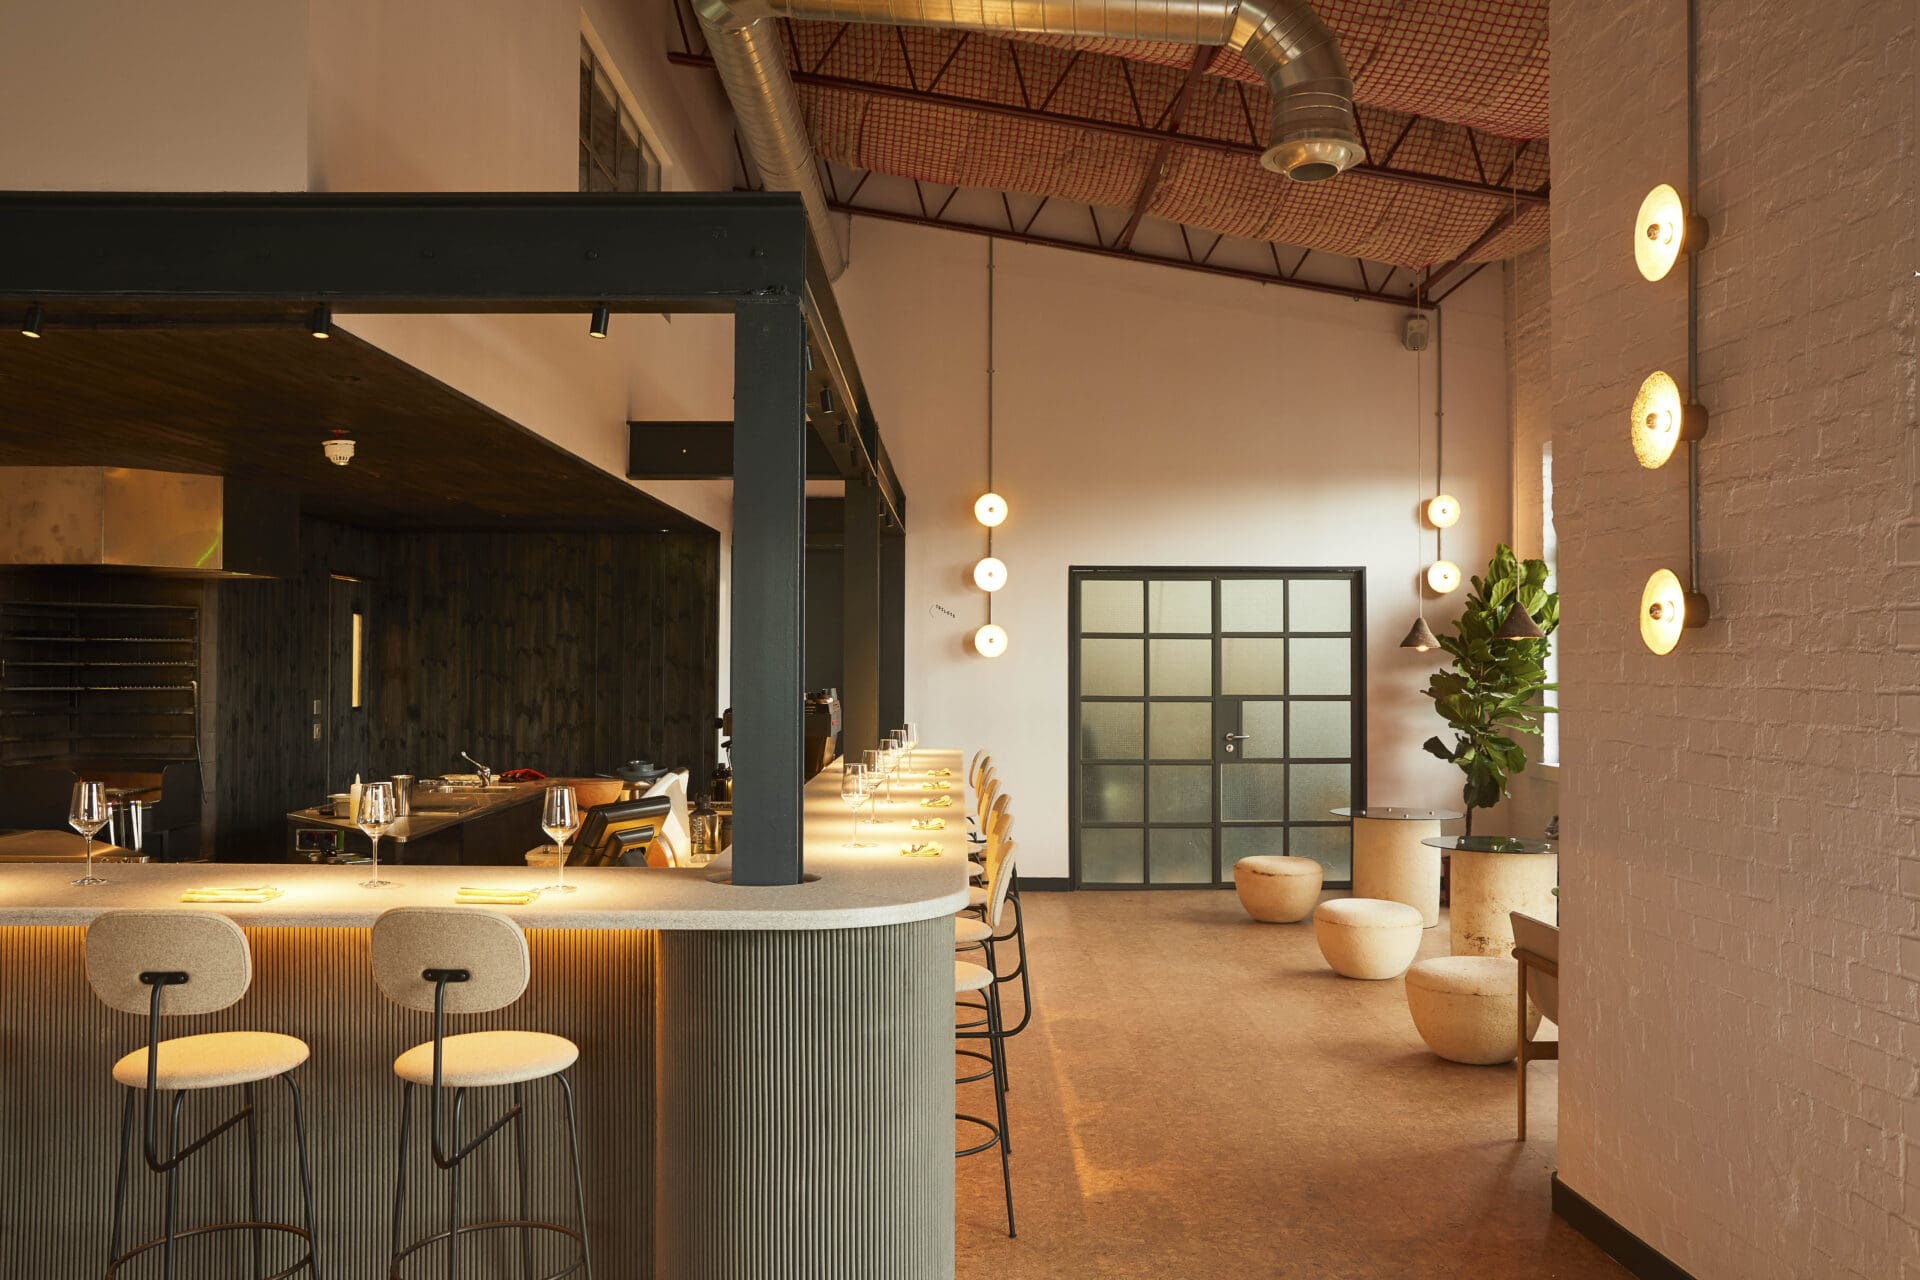 The best restaurants in Hackney | An interior view of the bar area at Silo, with moody lights and modern furniture